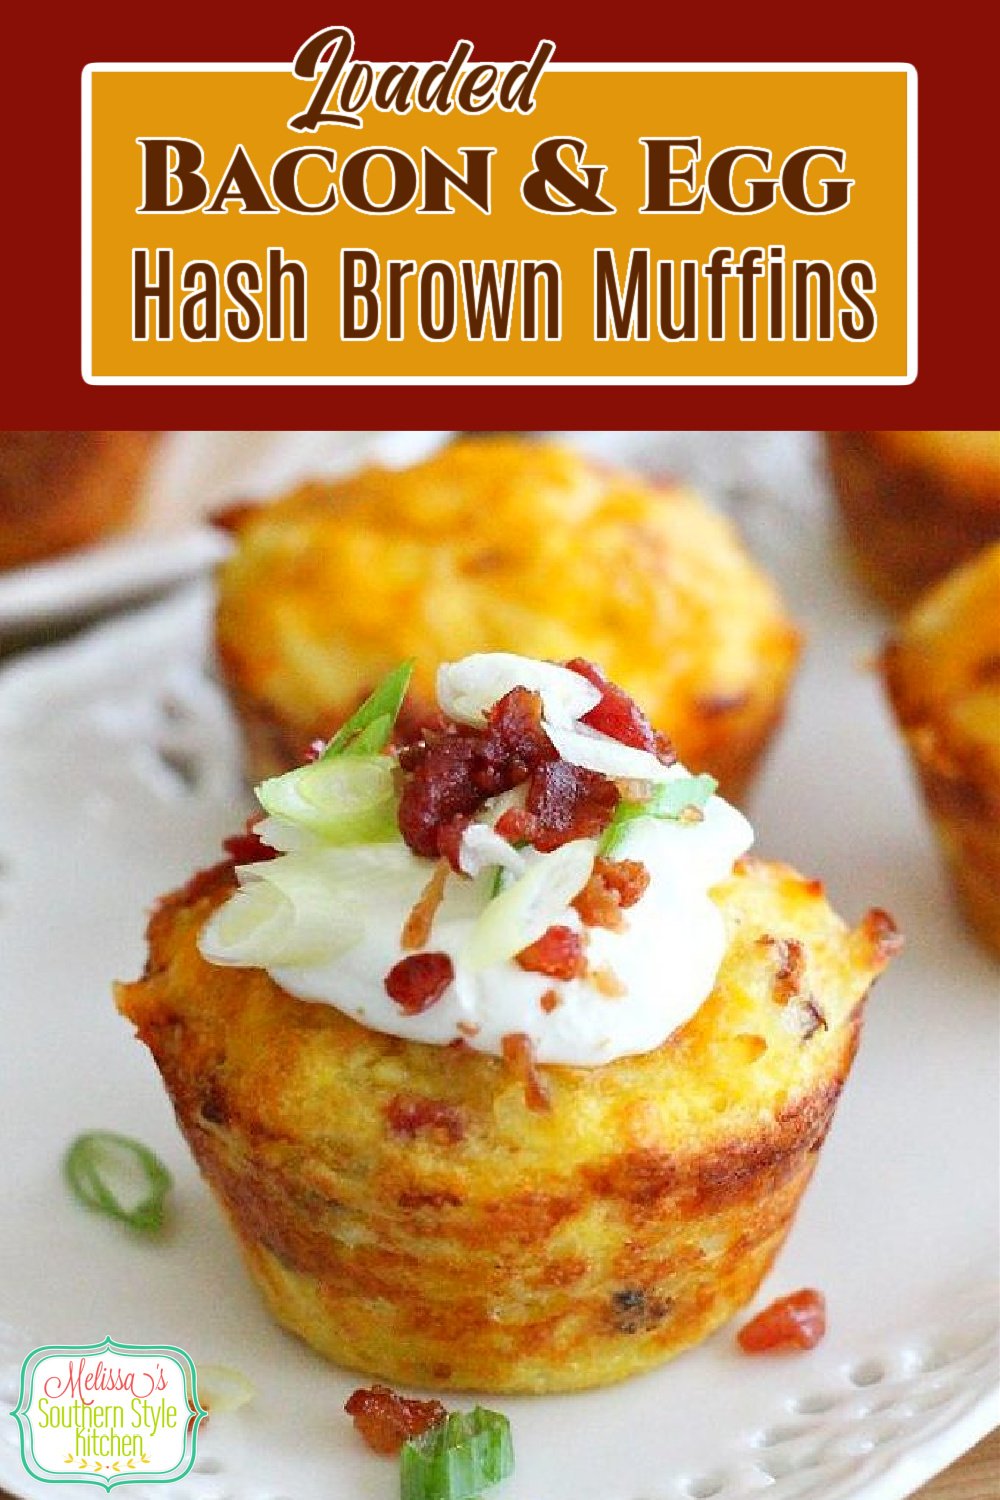 Start your day with these oh-so-delicious Loaded Bacon and Egg Hash Brown Muffins #baconandeggs #eggs #muffins #eggmuffins #hashbrowns #bacon #brunchrecipes #breakfastrecipes #southernfood #holidaybrunch #southernrecipes